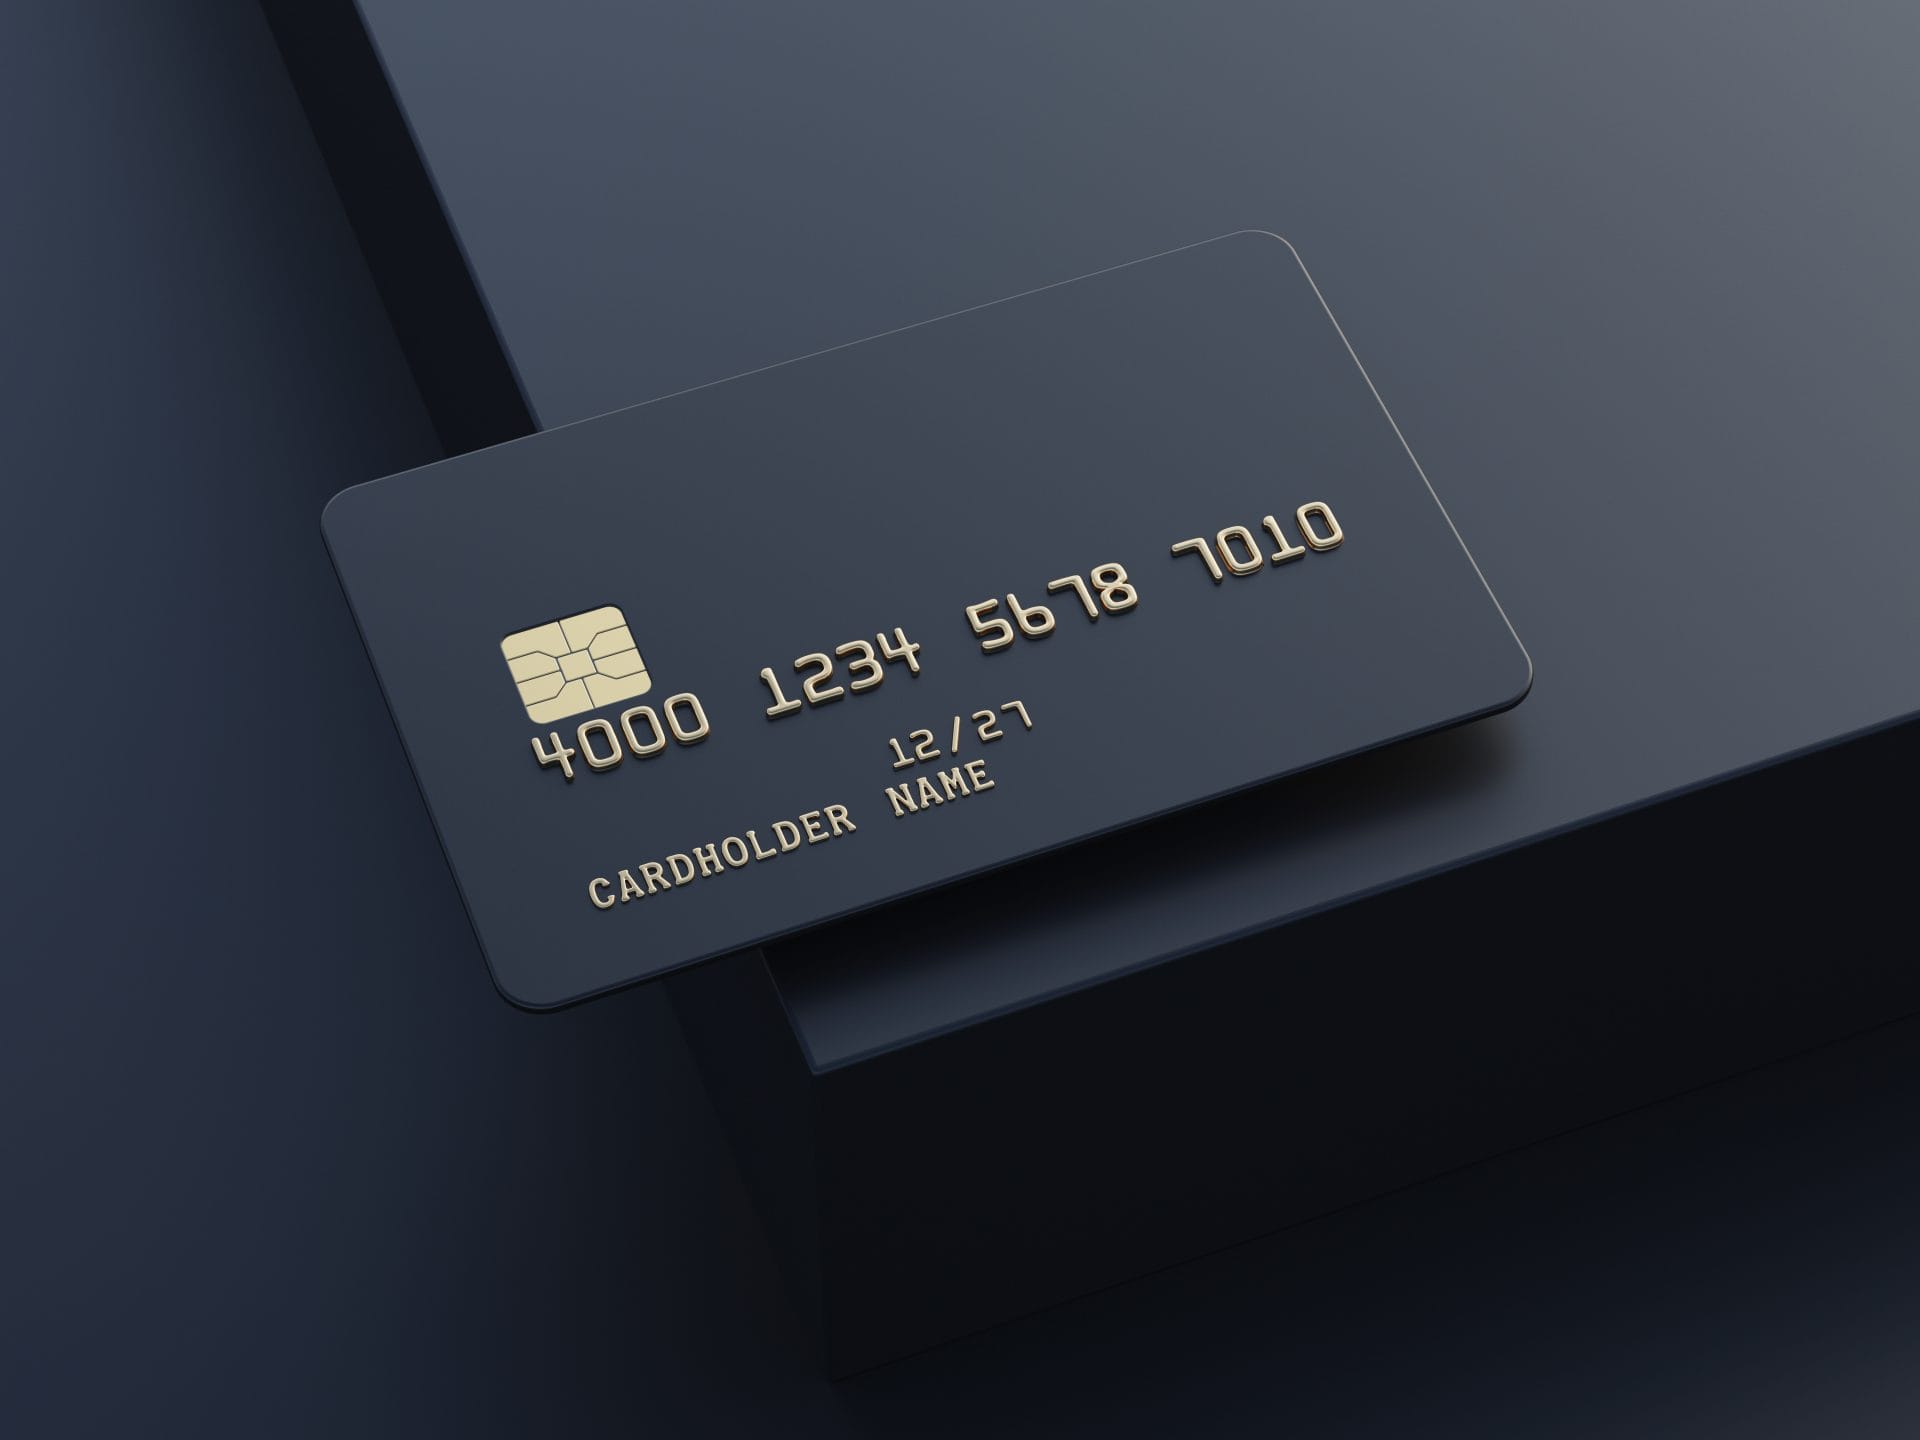 Design Trends in Payment Cards: Shaping Consumer Preferences